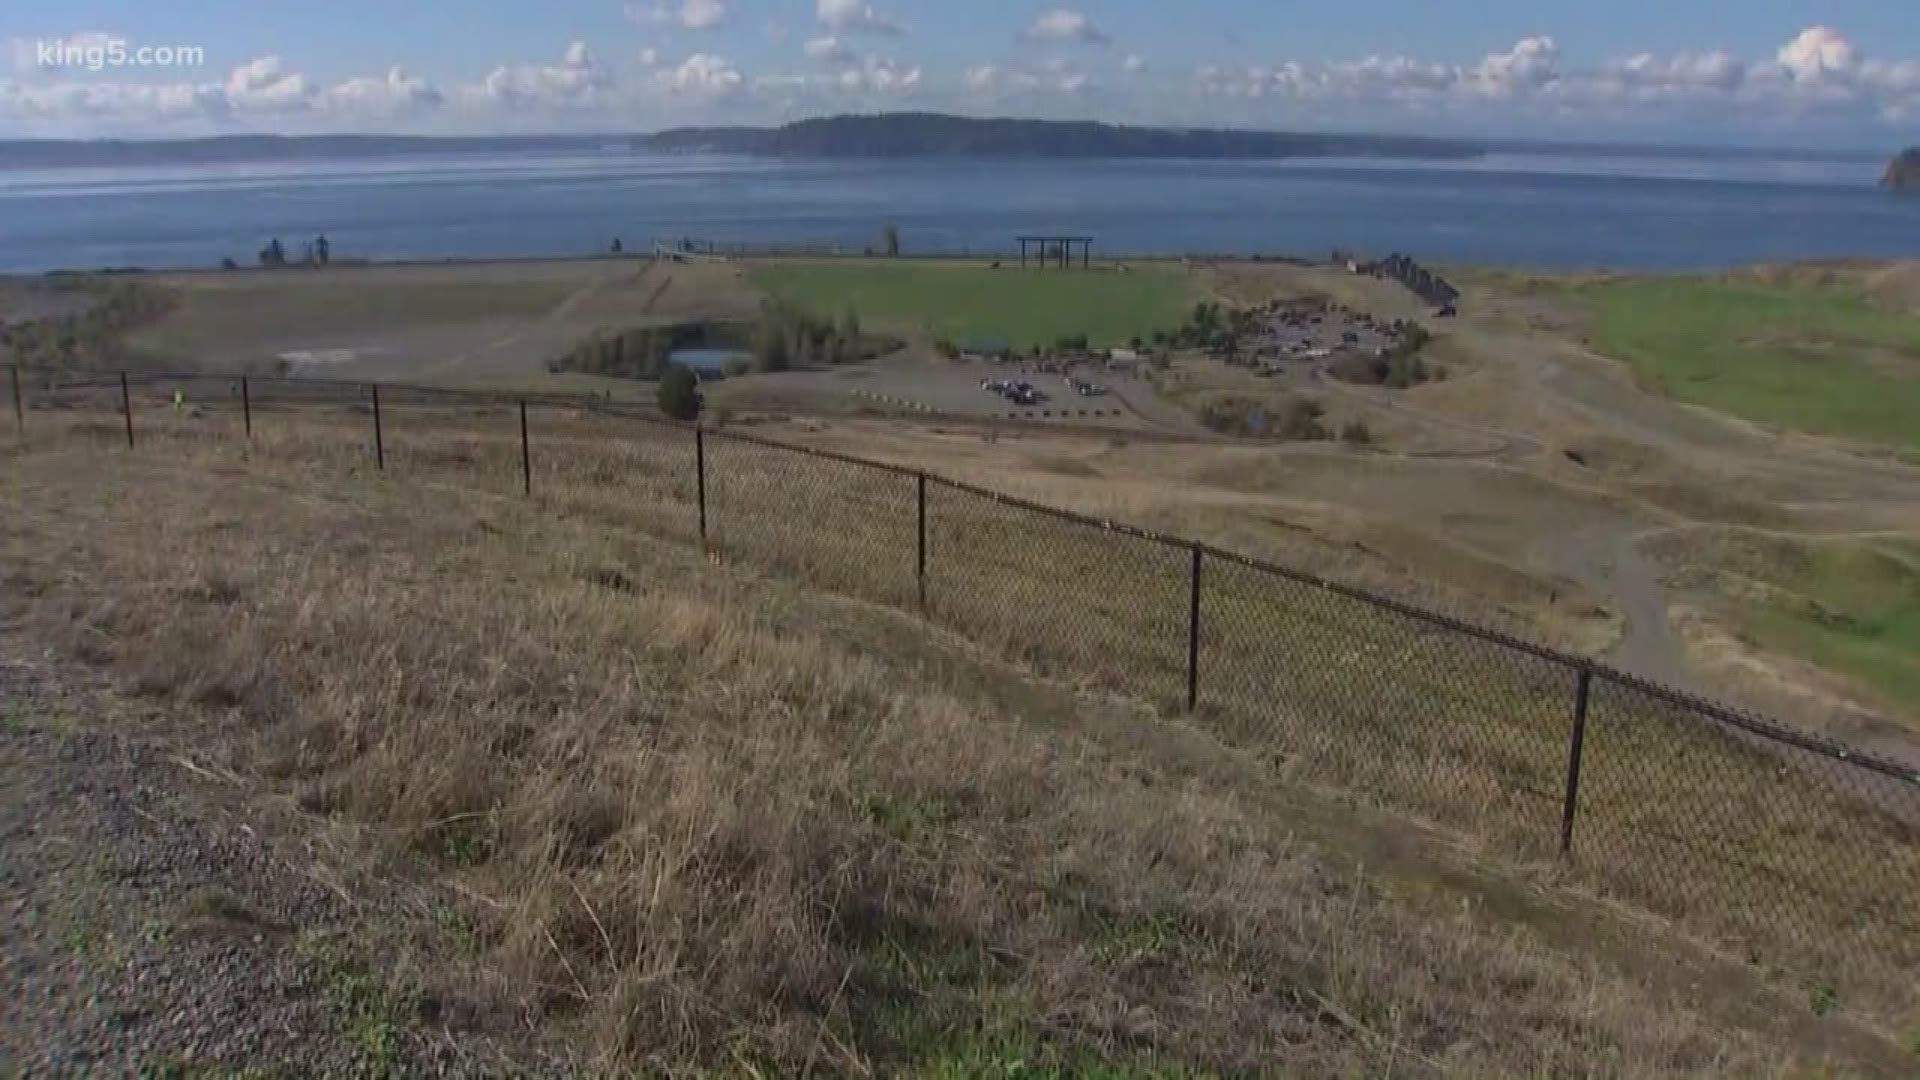 You may be familiar with Chambers Bay in Pierce County, the renowned golf course and park that brought the U.S. Open to the South Sound. The County took a big step to further develop that property. The council voted to move forward with work to develop a resort on the property. But KING 5's Jenna Hanchard tells us, not everyone's happy with the decision.